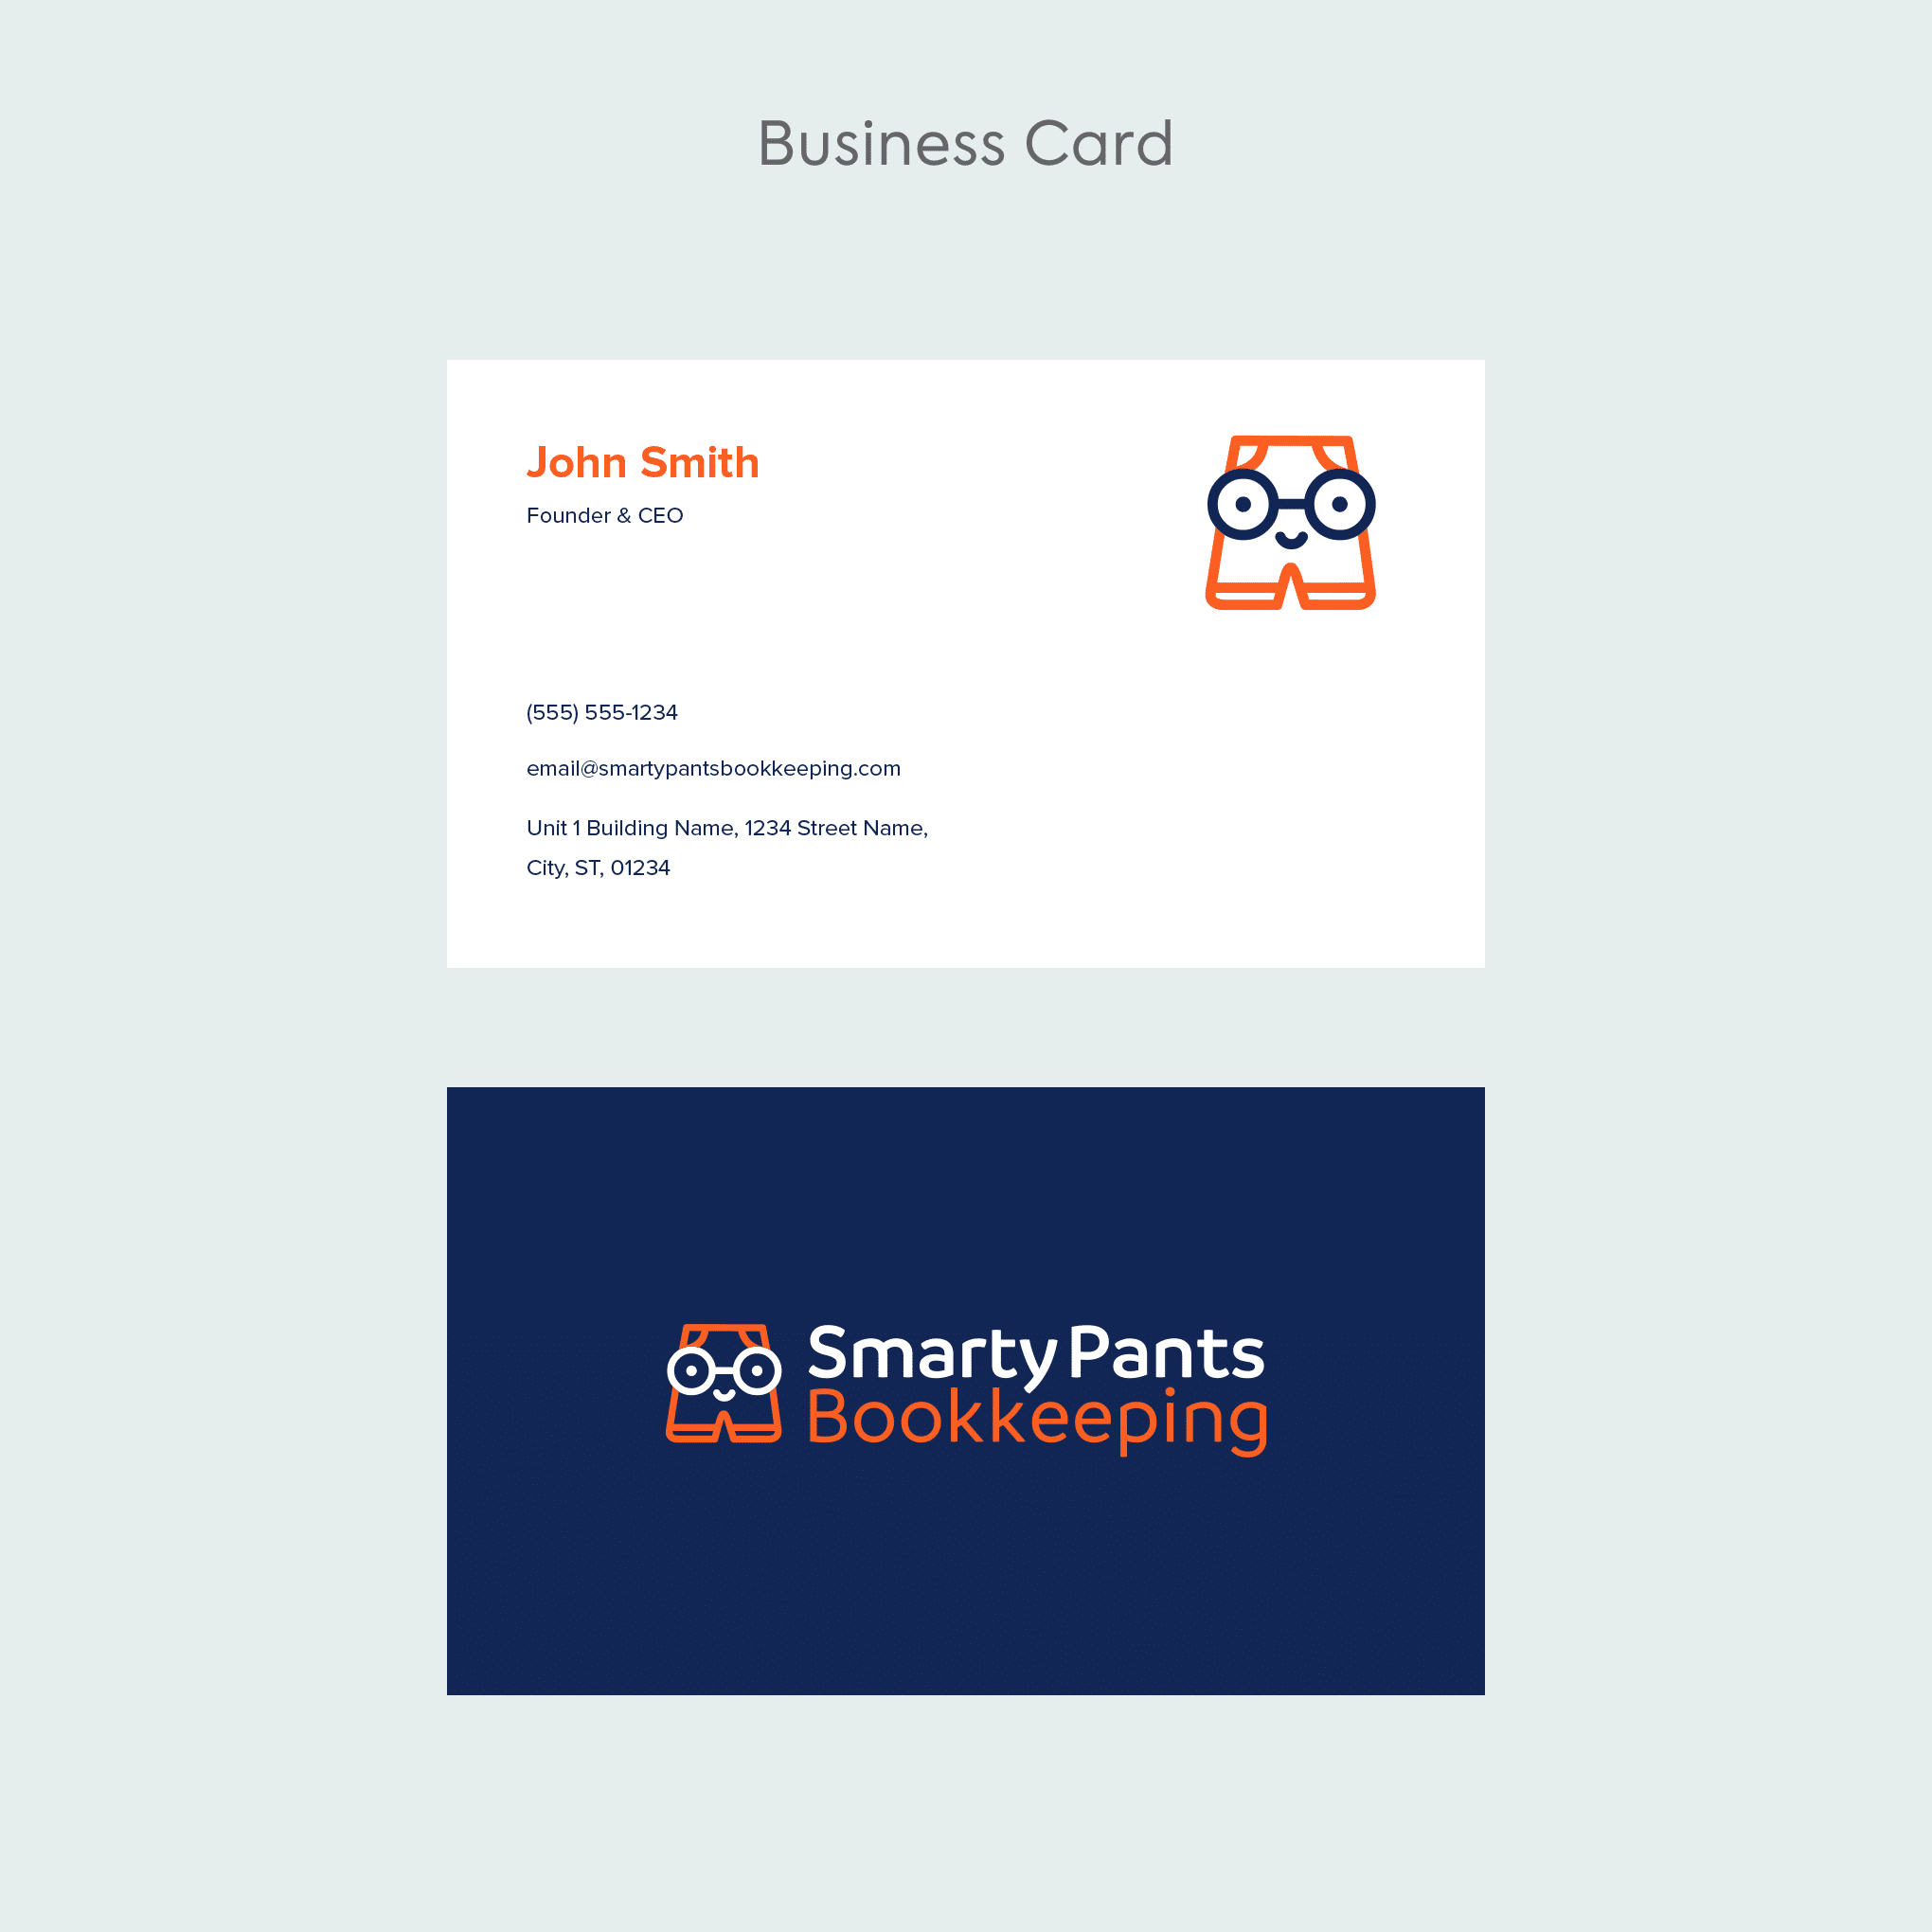 04 - Business Card Template (10)